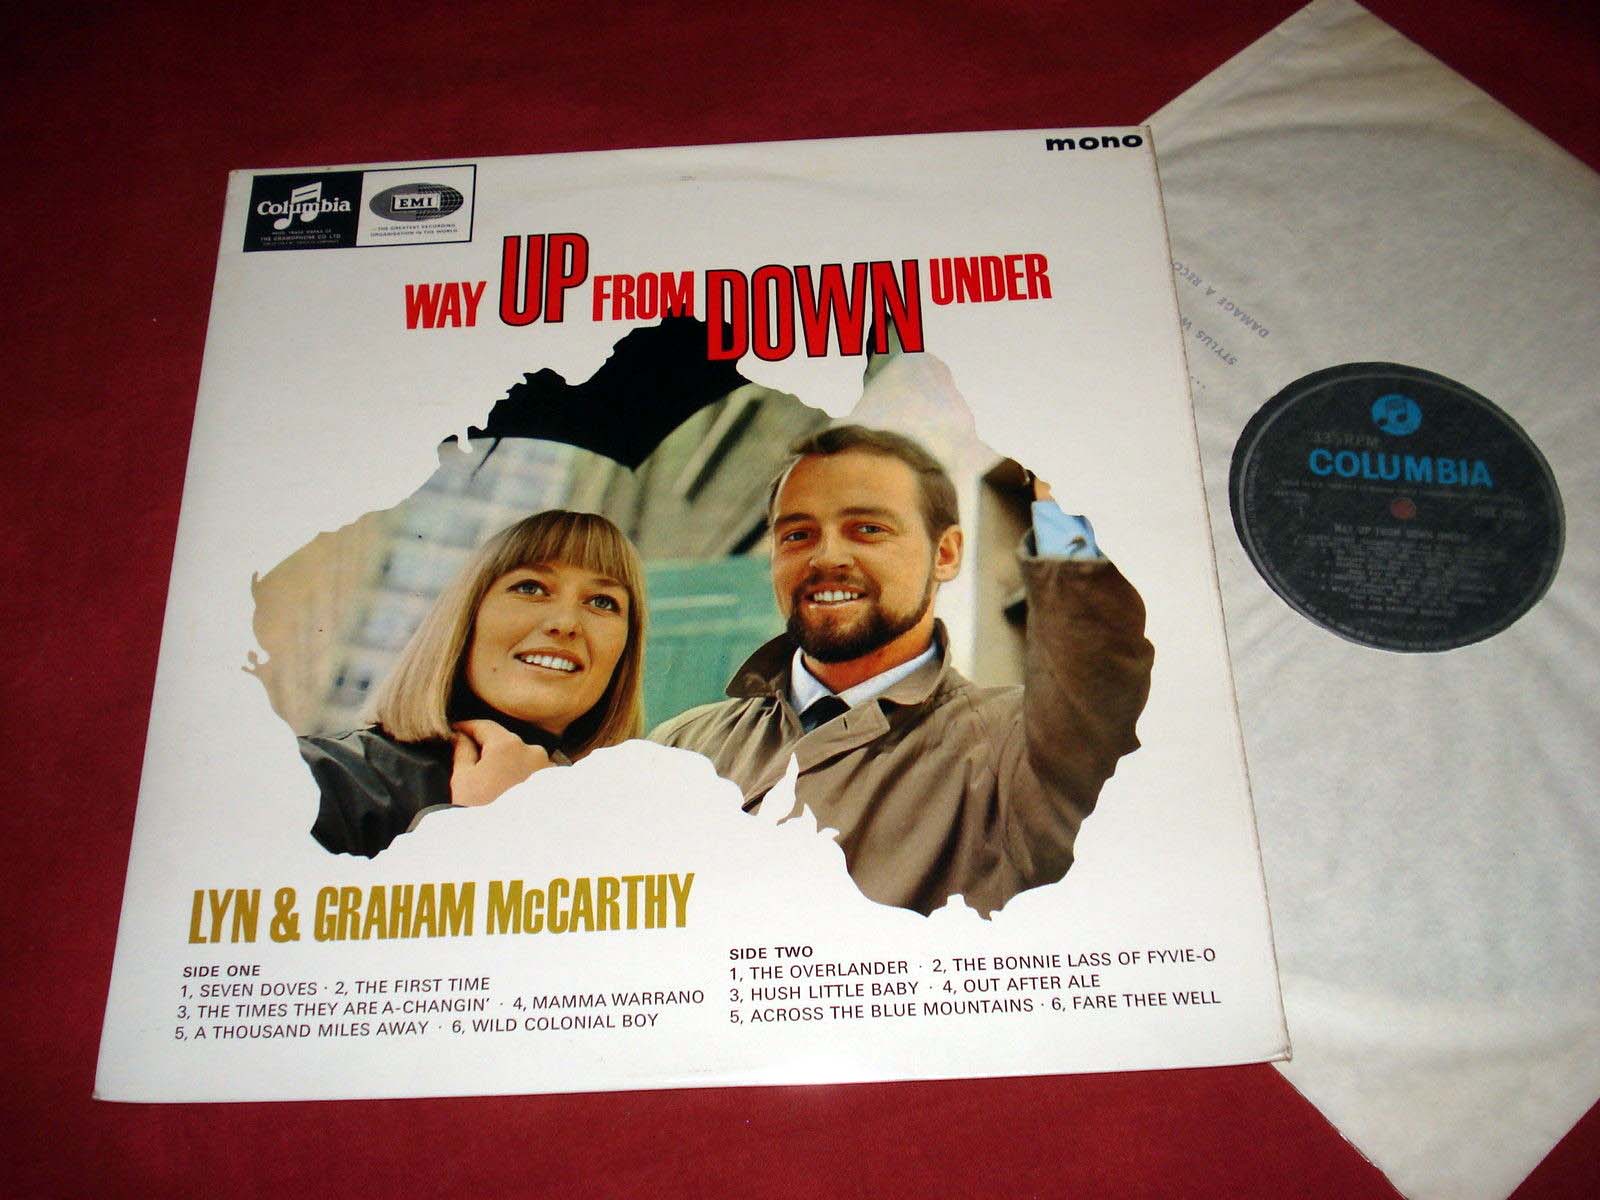 LYN & GRAHAM McCARTHY - Way up from down under